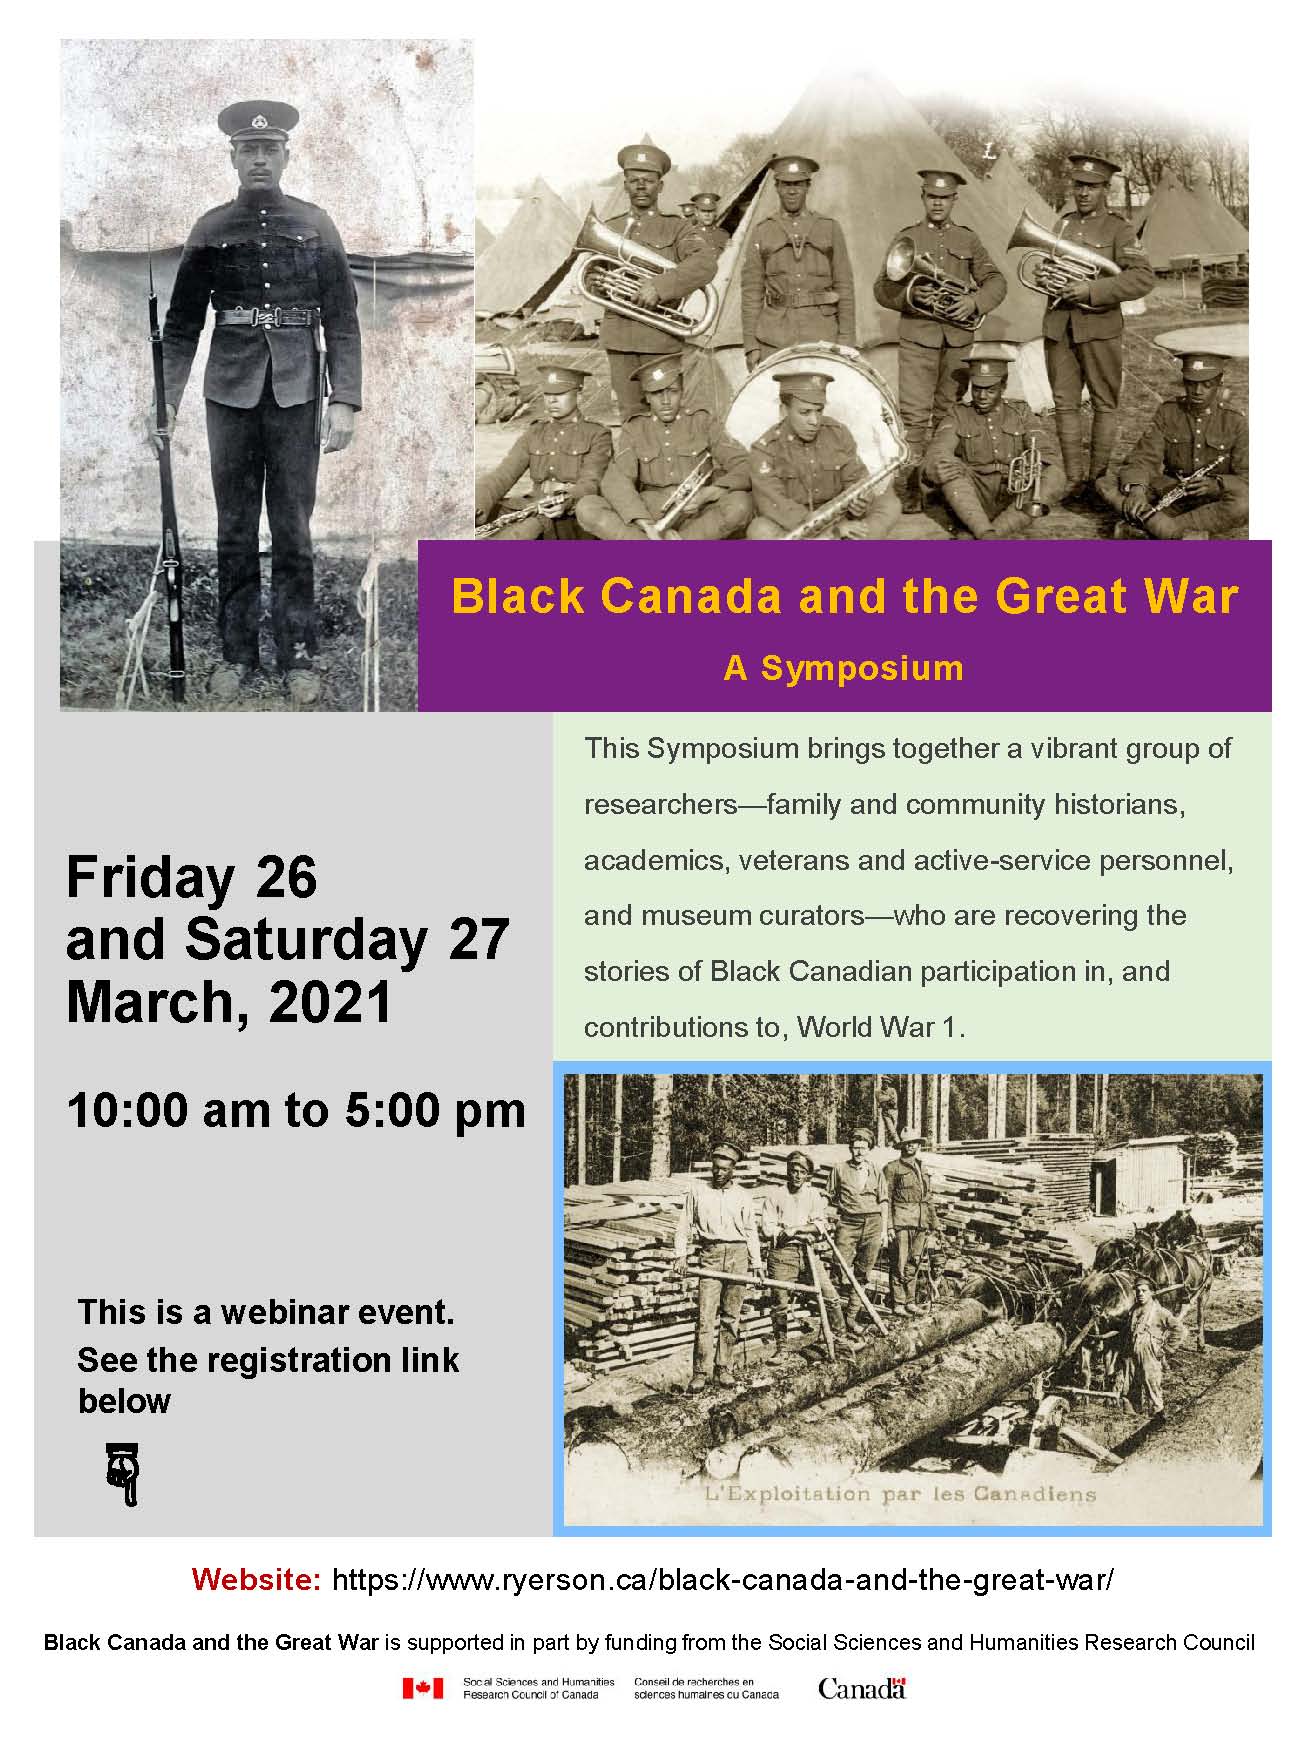 Black Canada and the Great War poster